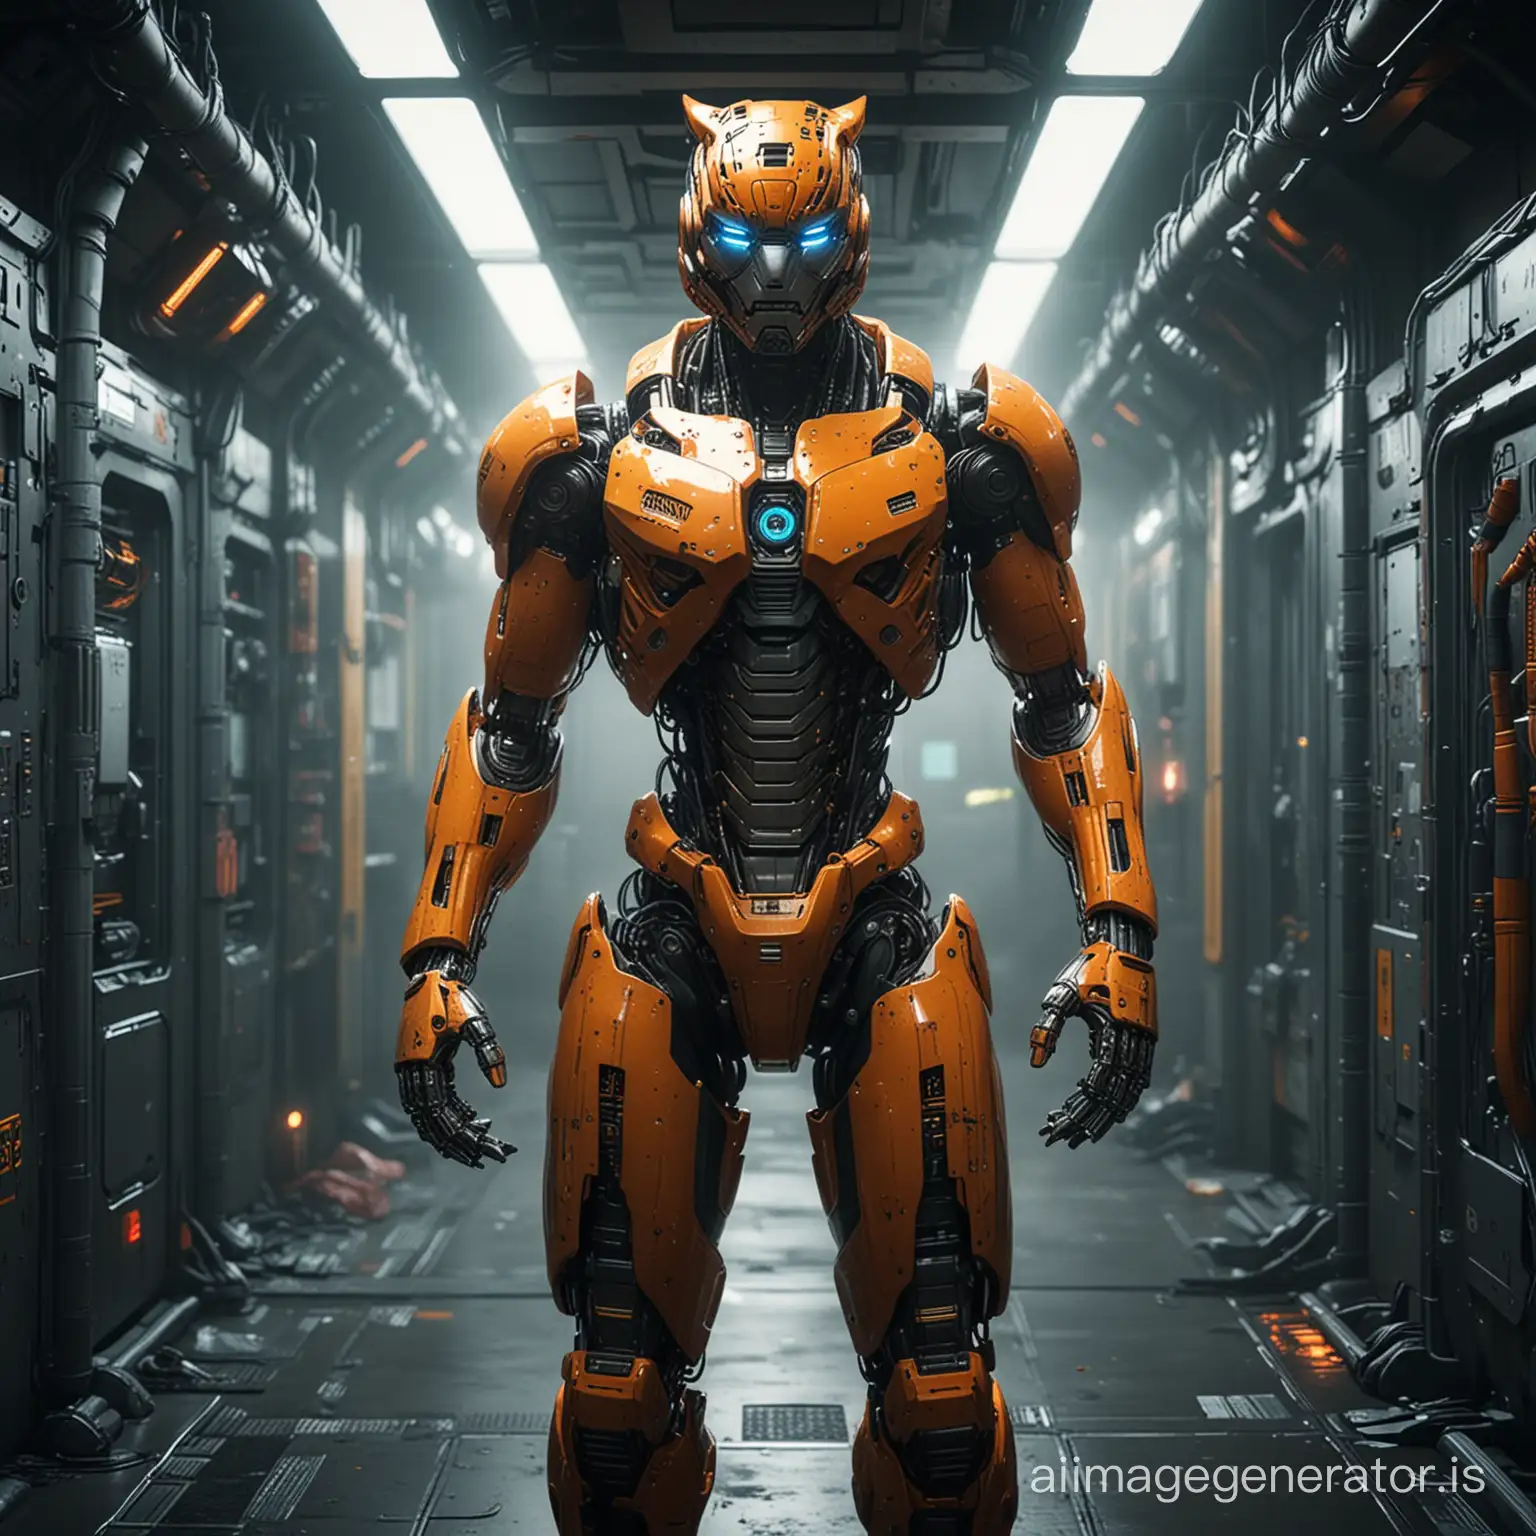 Image Ratio: Square (1:1)
Subject: a tiger
Stand: Dynamic Stand, Aggressive Stand
Mood: Futuristic
Outfit: a detailed metallic and orange robot body and head
Setting: a corridor richly equipped with computers, screens and technologic parts fixed on its walls
Added Details: multicolor diodes,
roof window opening,
closed door at the end of the corridor,
more intricate details in its robotic body,
a three-quarter view of its robotic body,
an enriched cyberpunk corridor environment,
natural and animalistic stance
Theme: Cyberpunk
Tone: Warm
Style: Futuristic
Genre: Sci-Fi, Cyberpunk
Atmosphere: Futuristic
Perspective: Frontal View
Lens: Wide-Angle
Composition: Central
Detailed: Digital, detailed robot parts
Lighting: Artificial, enriched dramatic lighting with god rays and fog effects, the scene appears to be lit with a combination of soft, diffuse lighting and sharper highlights to accentuate the metal parts' sheen
Technical Aspects: detailed, stylized, illustrative